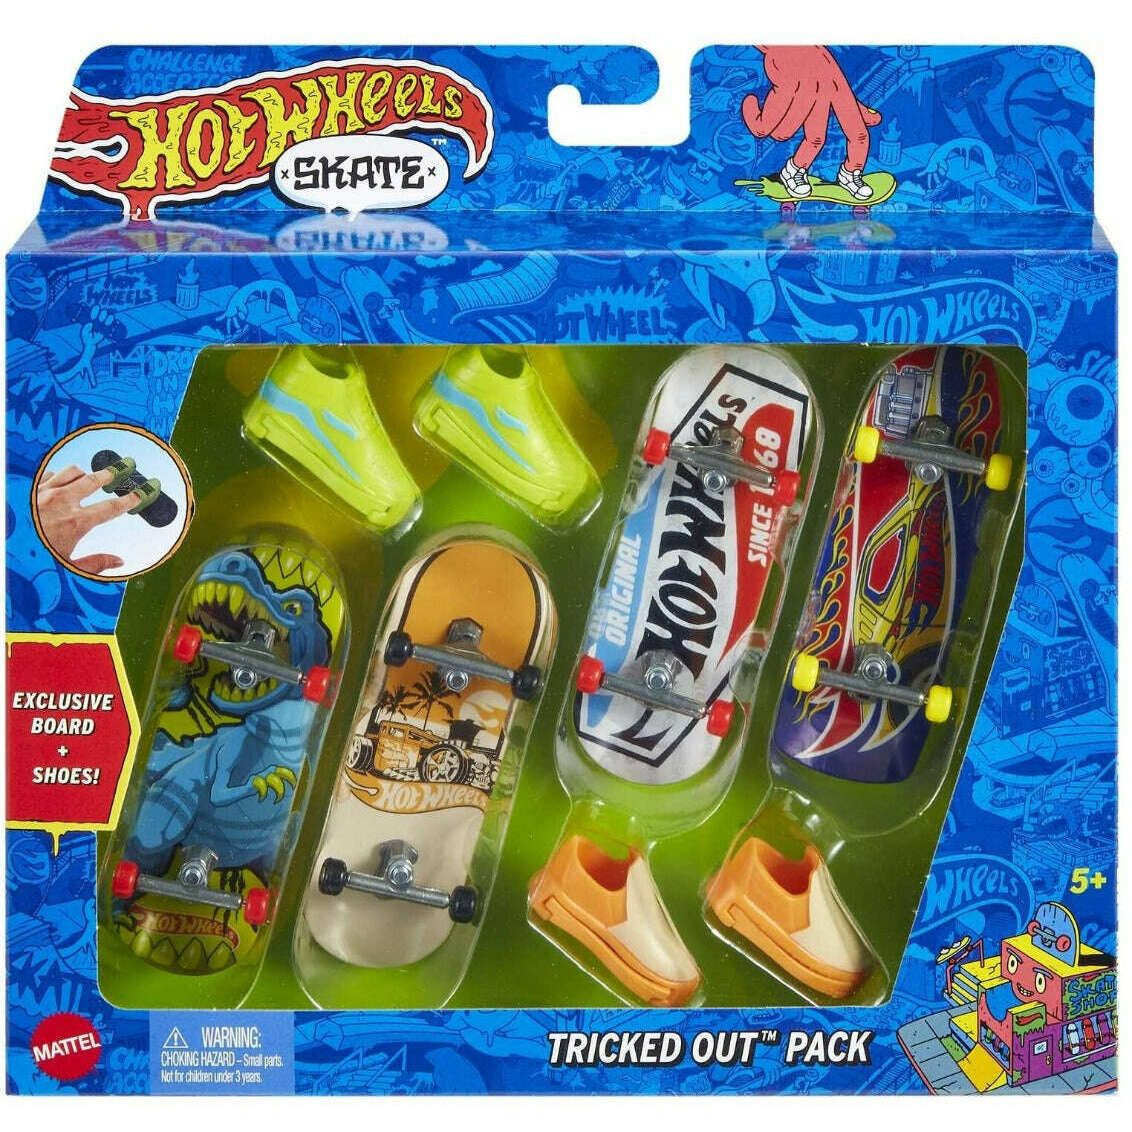 Toys N Tuck:Hot Wheels Skate 4 Pack - Tricked Out Pack,Hot Wheels